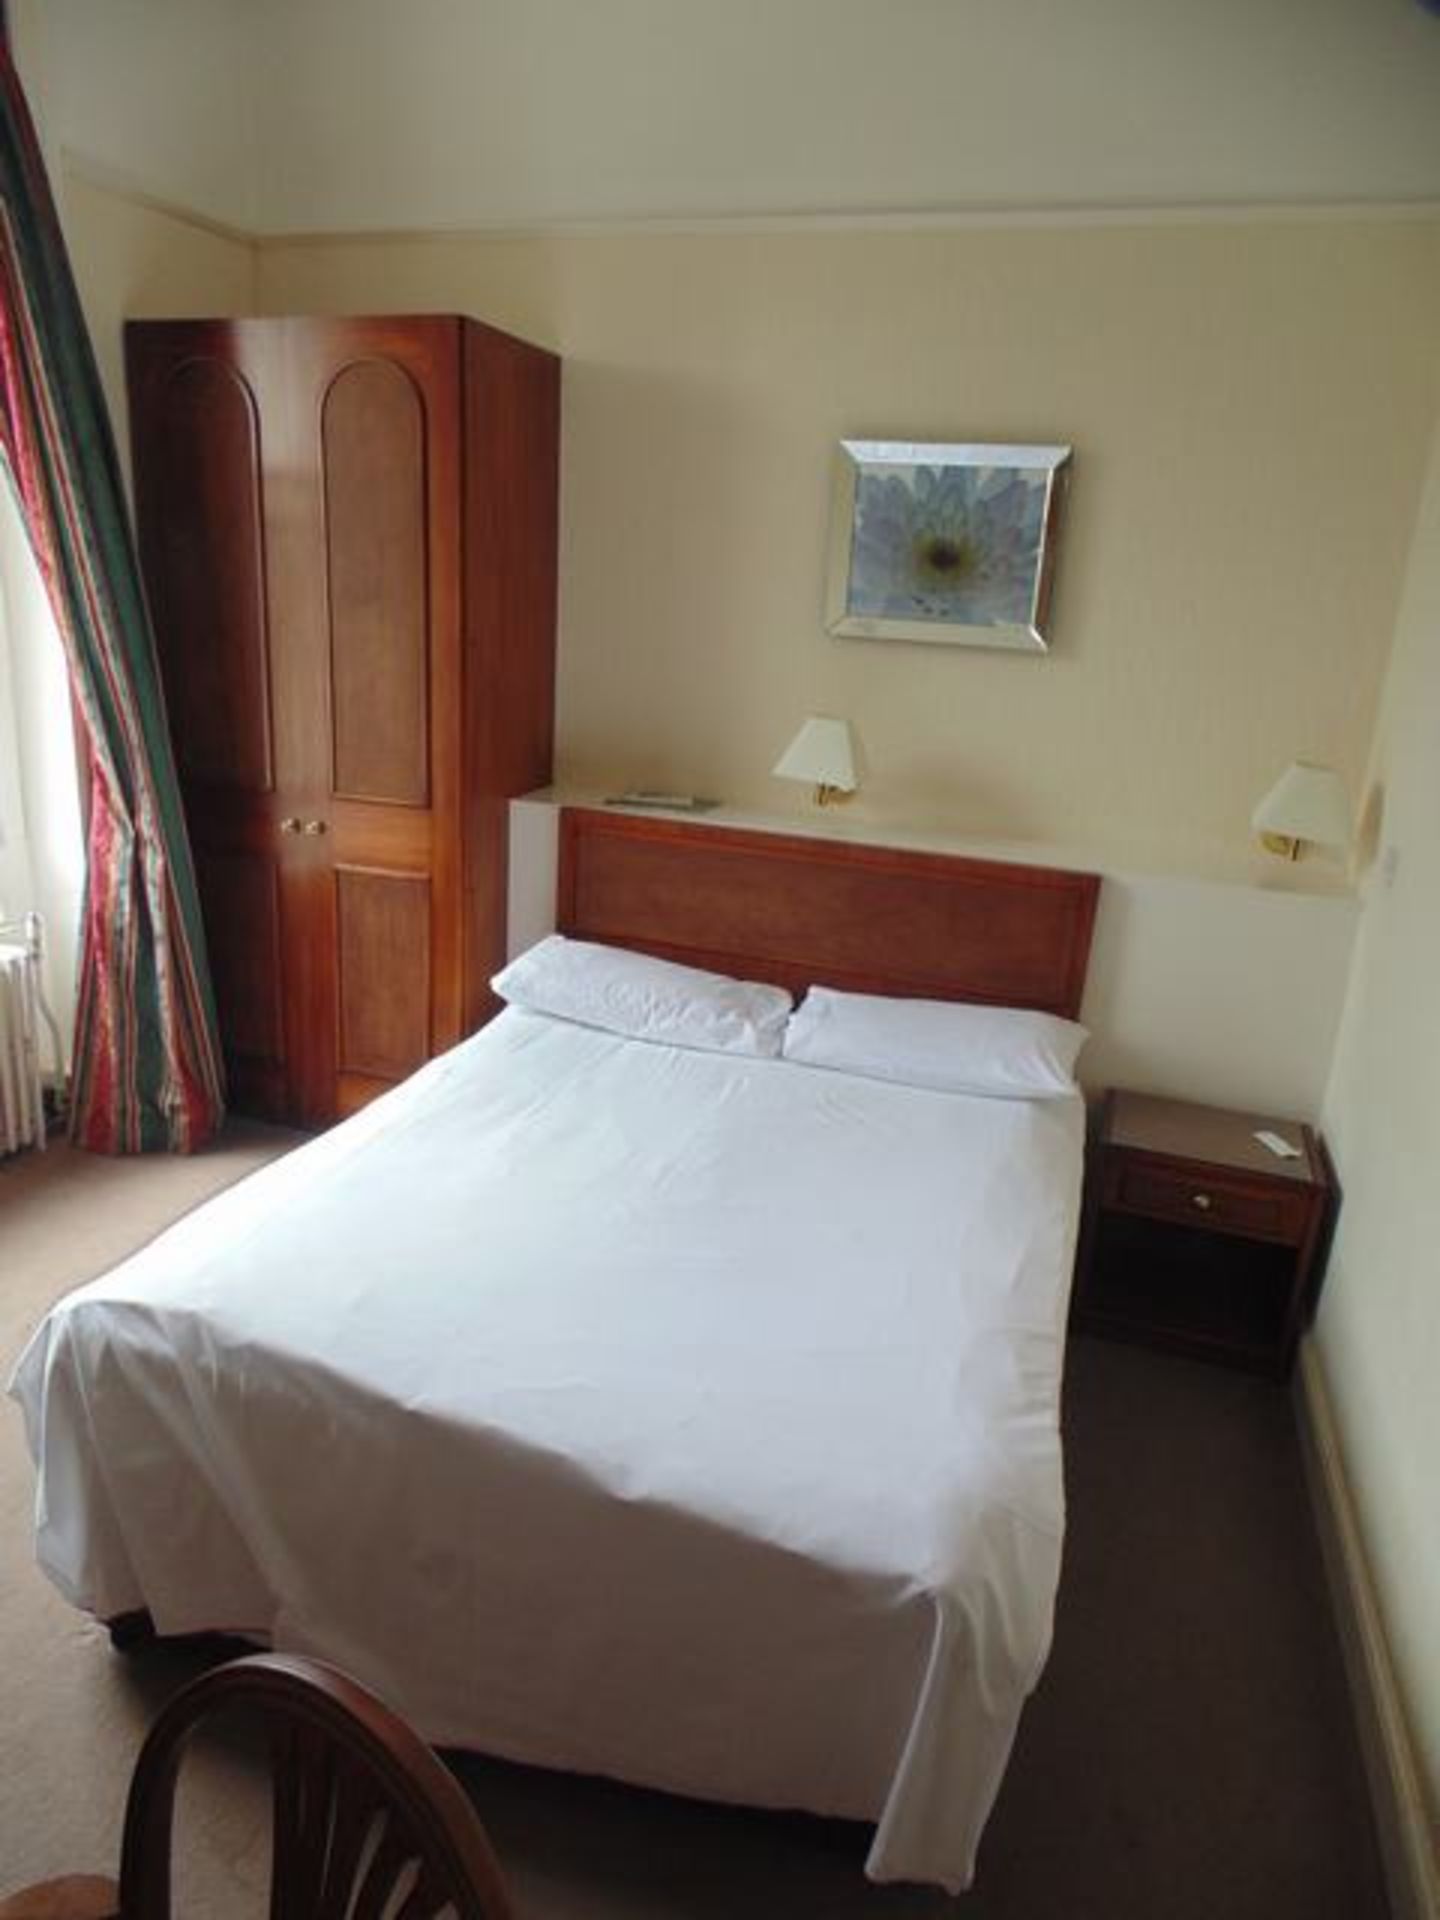 Content of Room 15 comprising of double bed and headboard, nightstand, wardrobe, desk and chair,